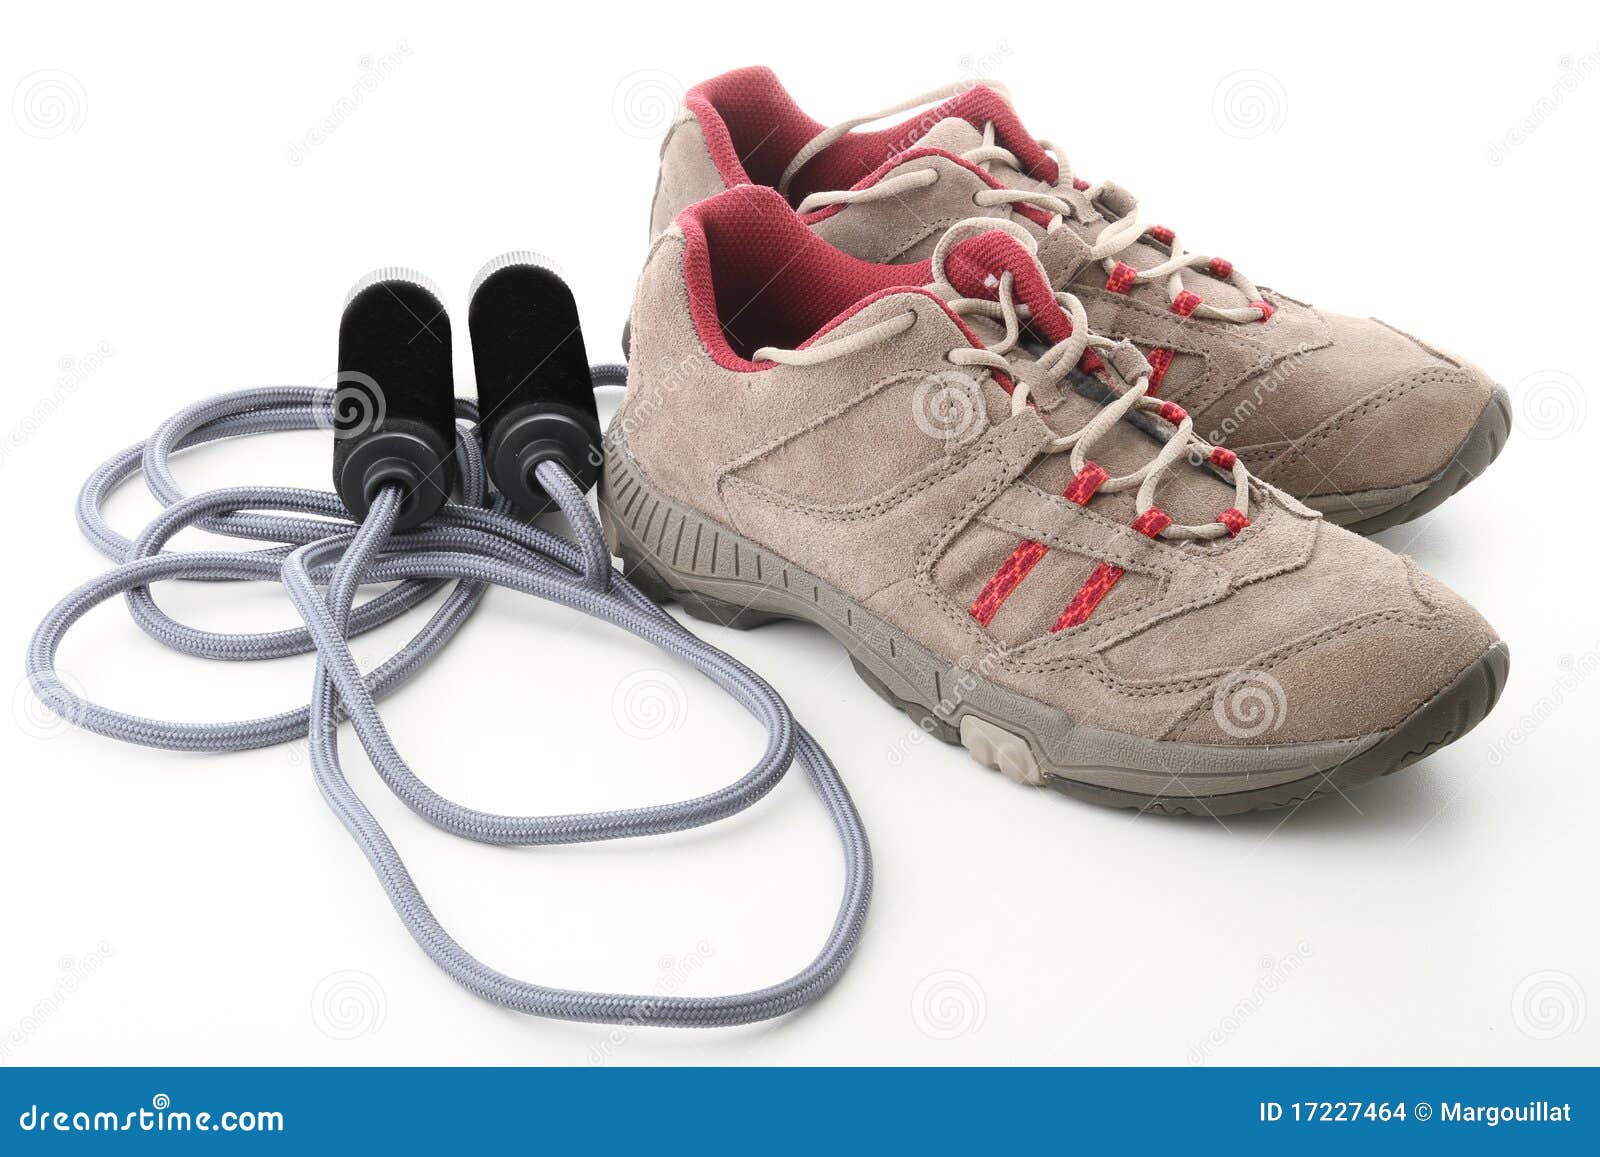 shoes for skipping